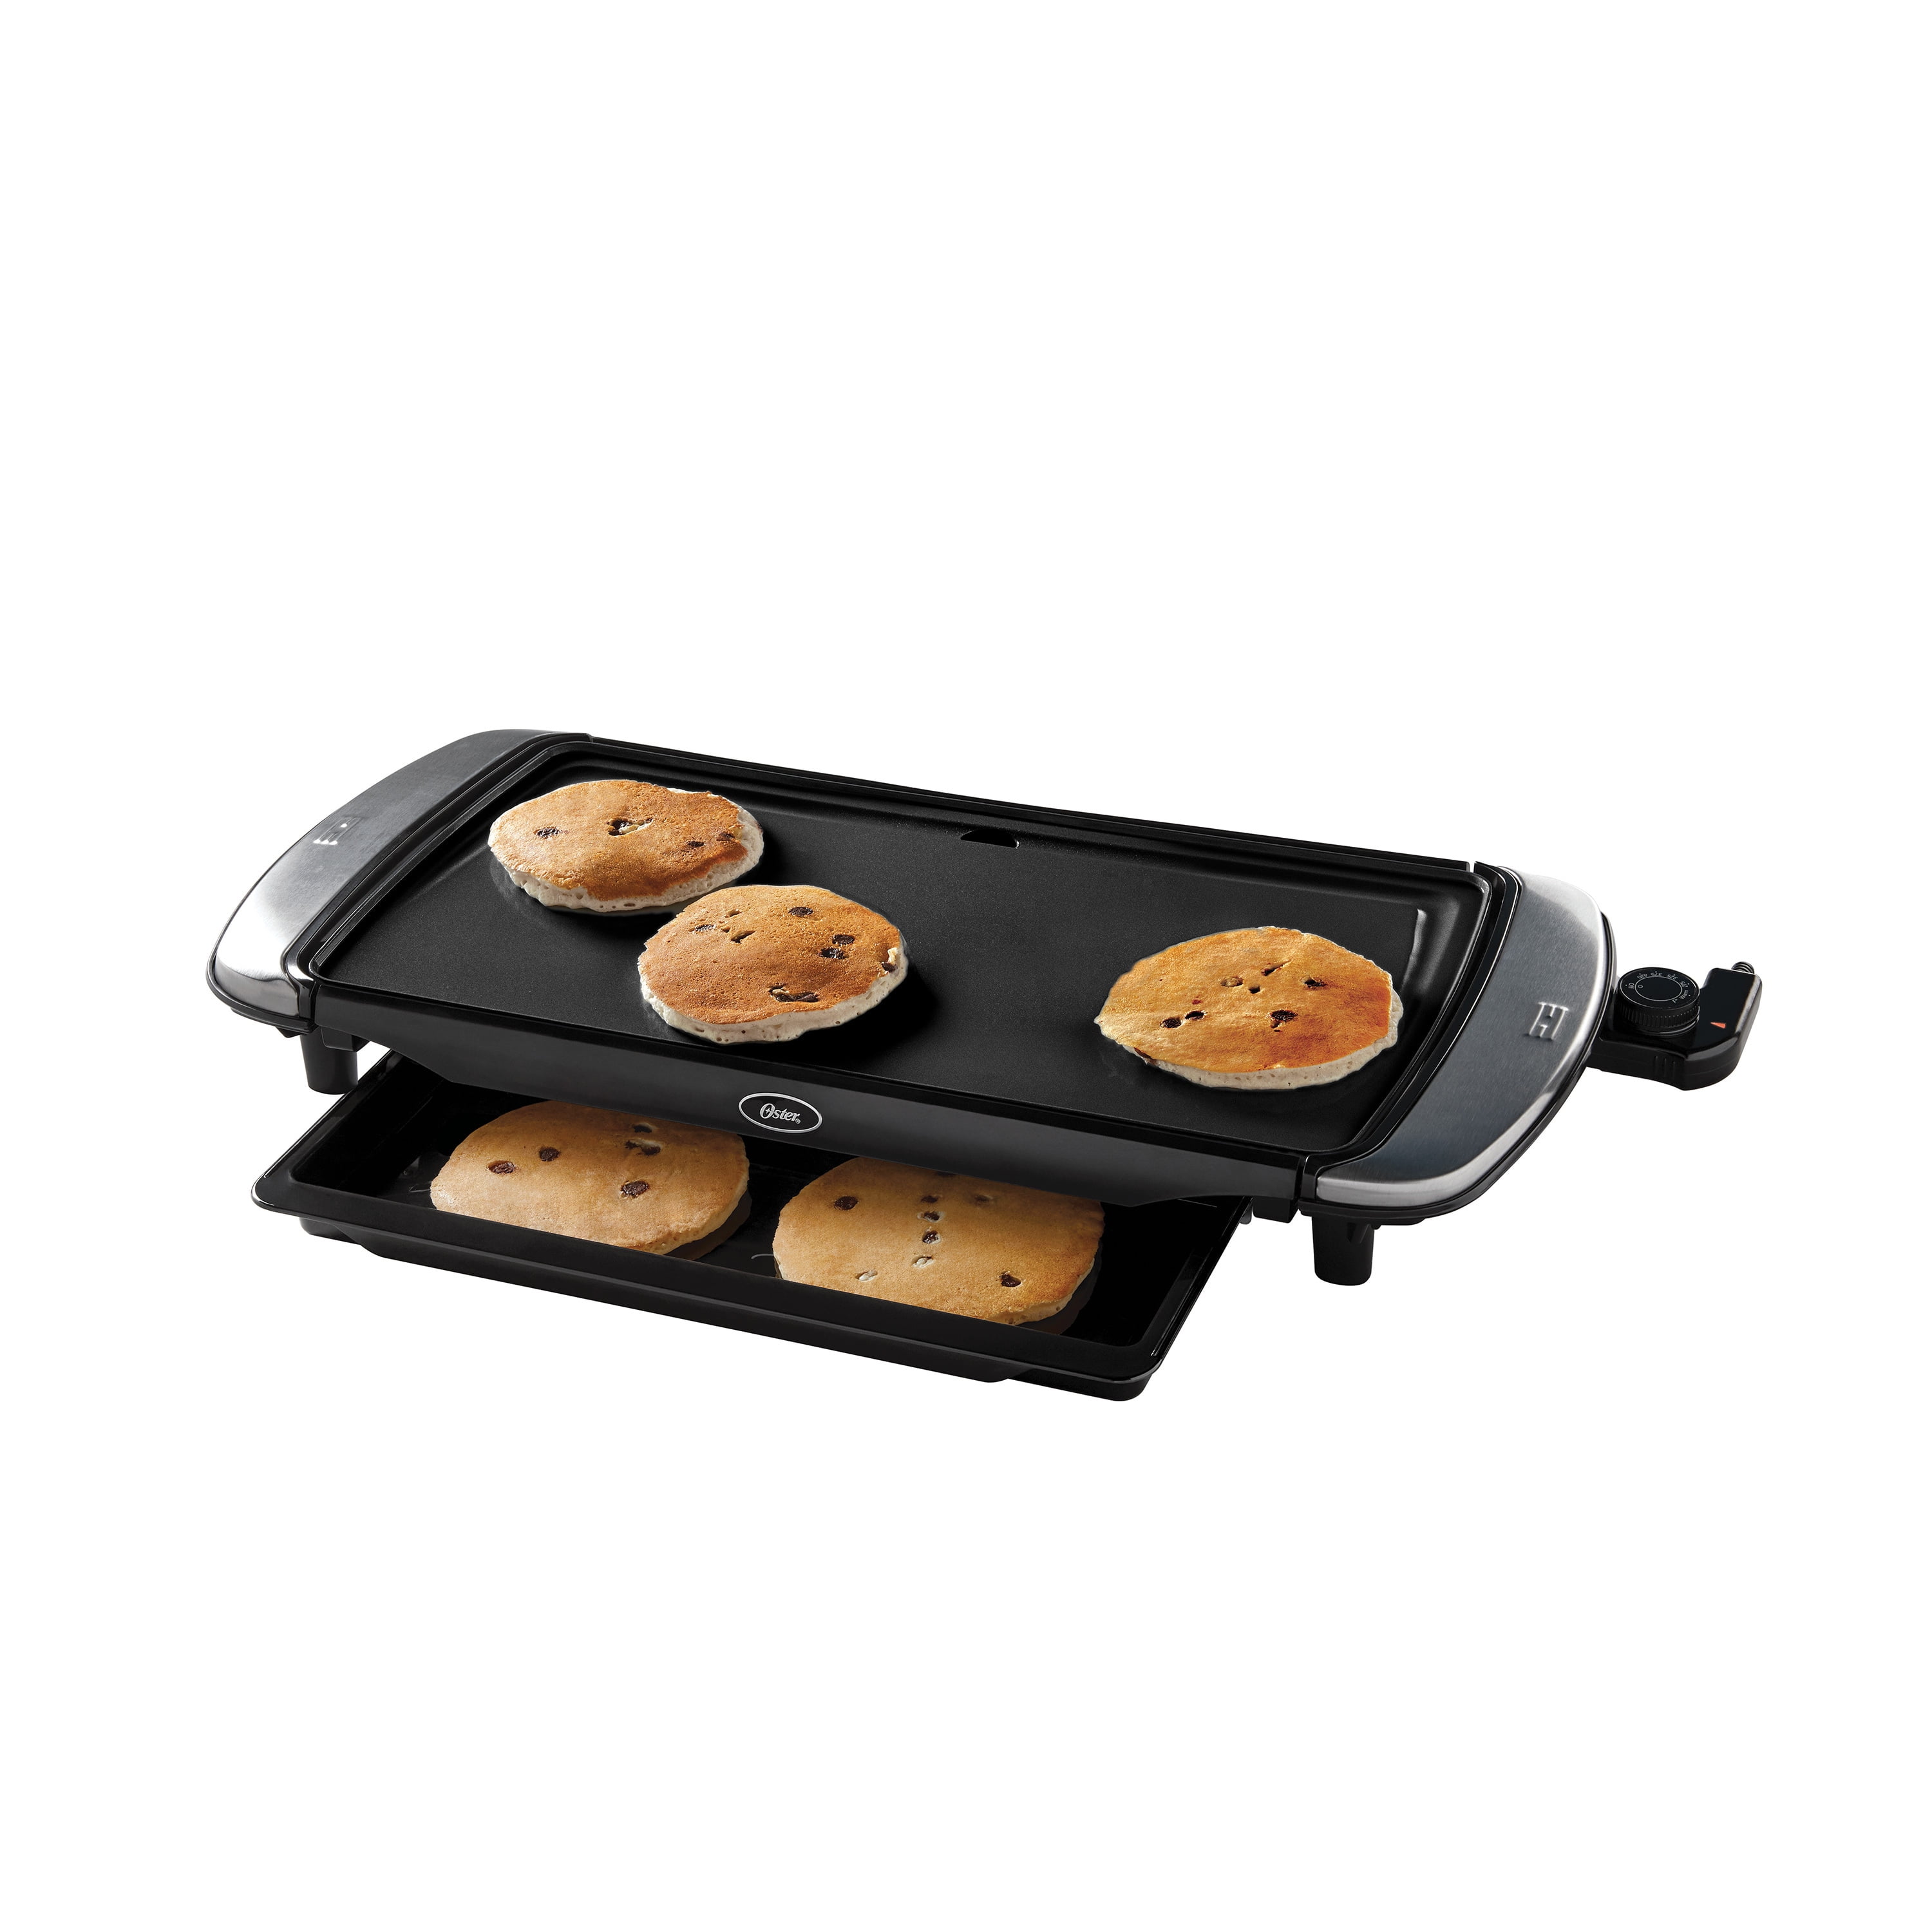 Oster DiamondForce 10-inch x 20-inch Nonstick Electric Griddle with Warming Tray